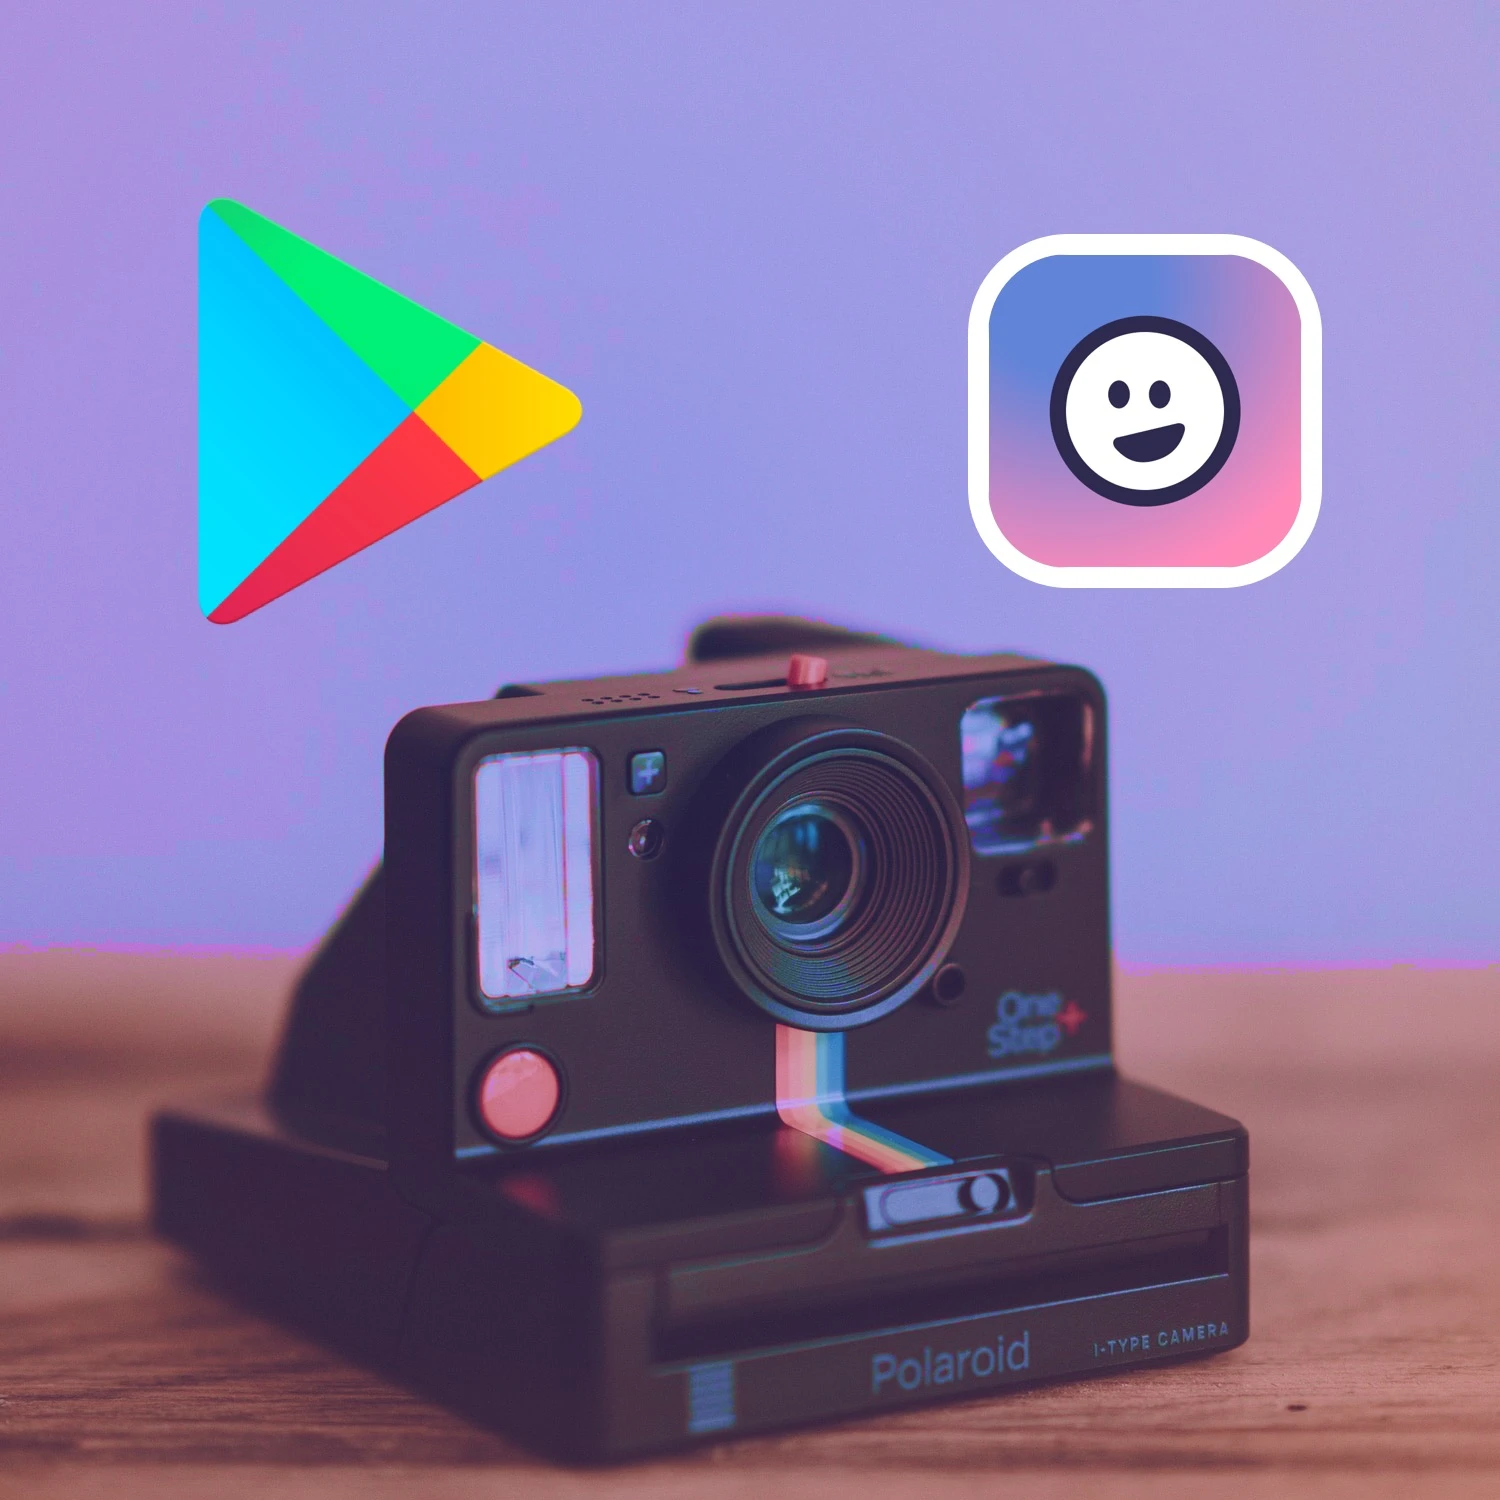 Purple hue photo with camera and Google icon with Happyfeed logo